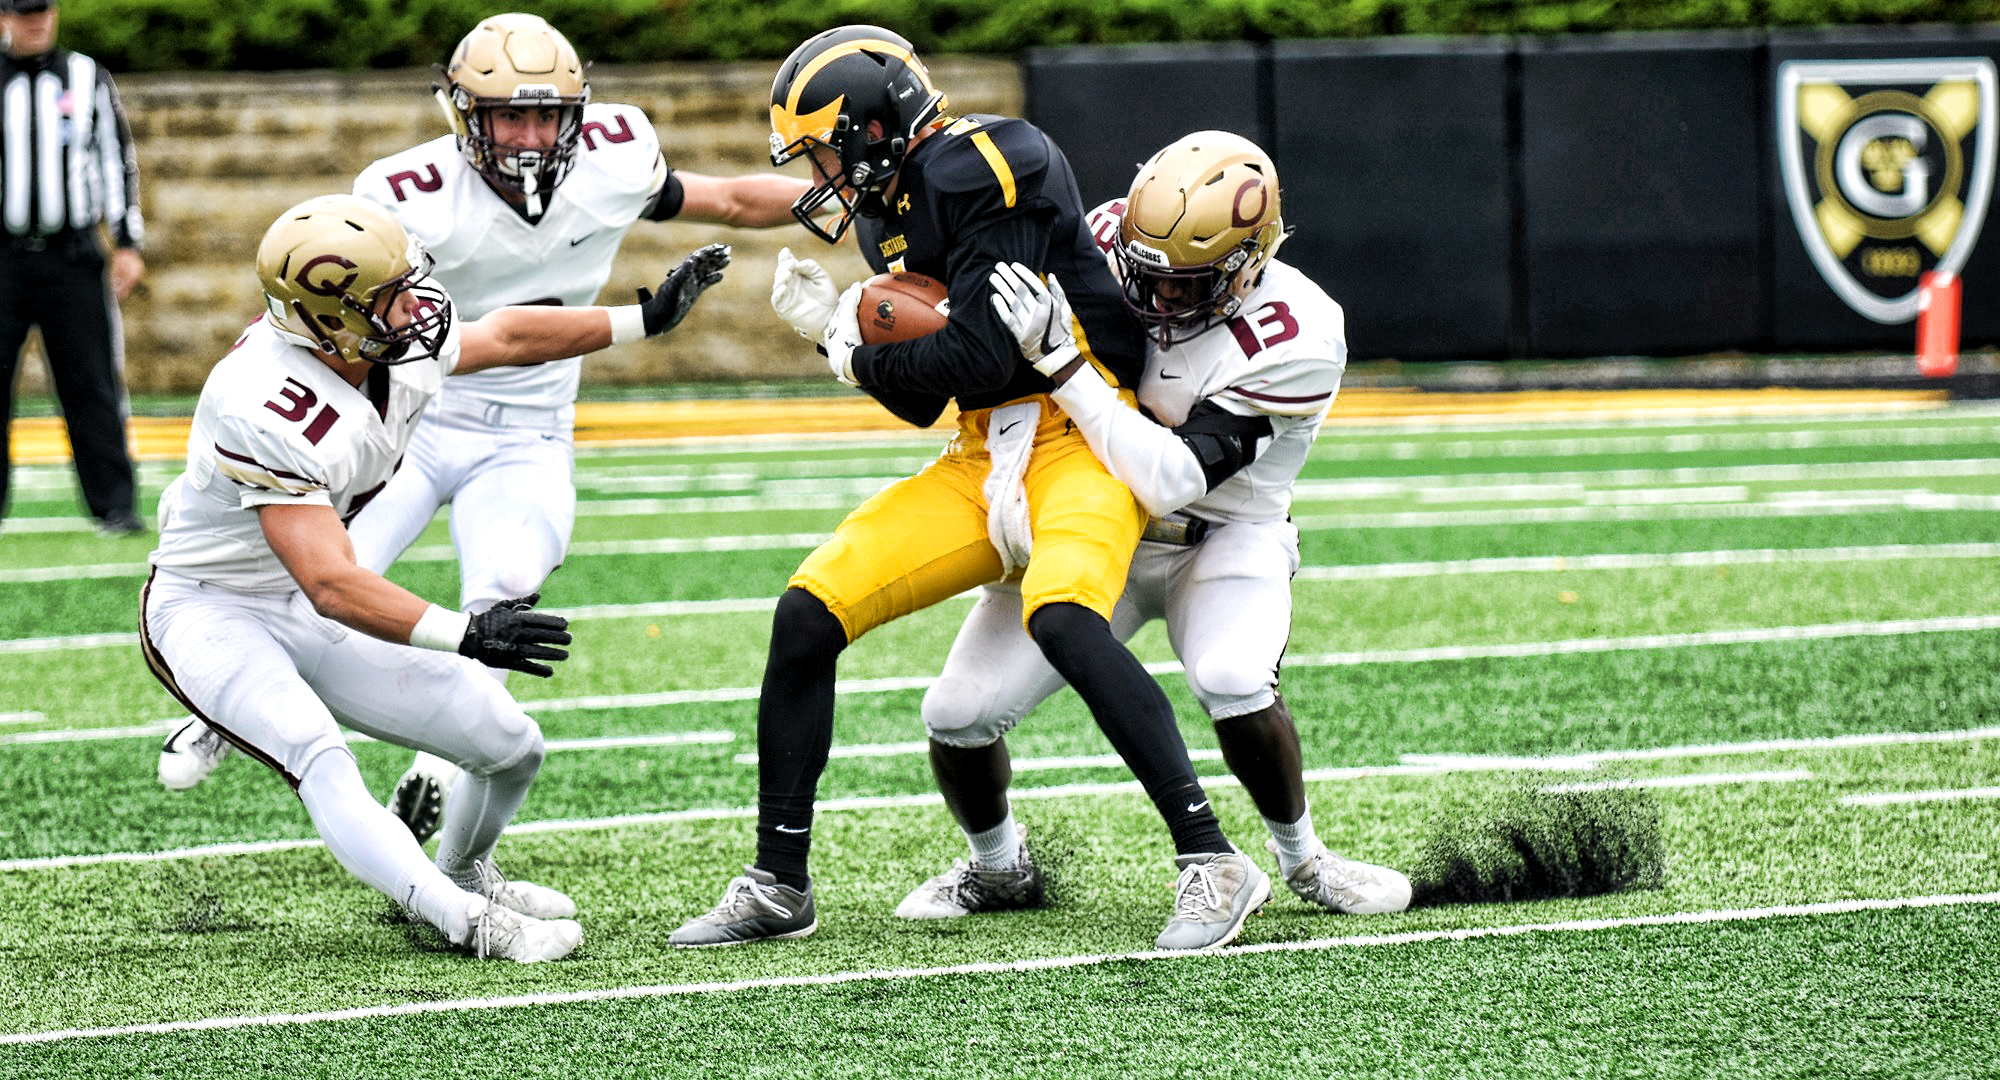 Cobber linebacker Willie Julkes (#13) puts the tackle on a Gustie ball carrier in Concordia's game at Gustavus.